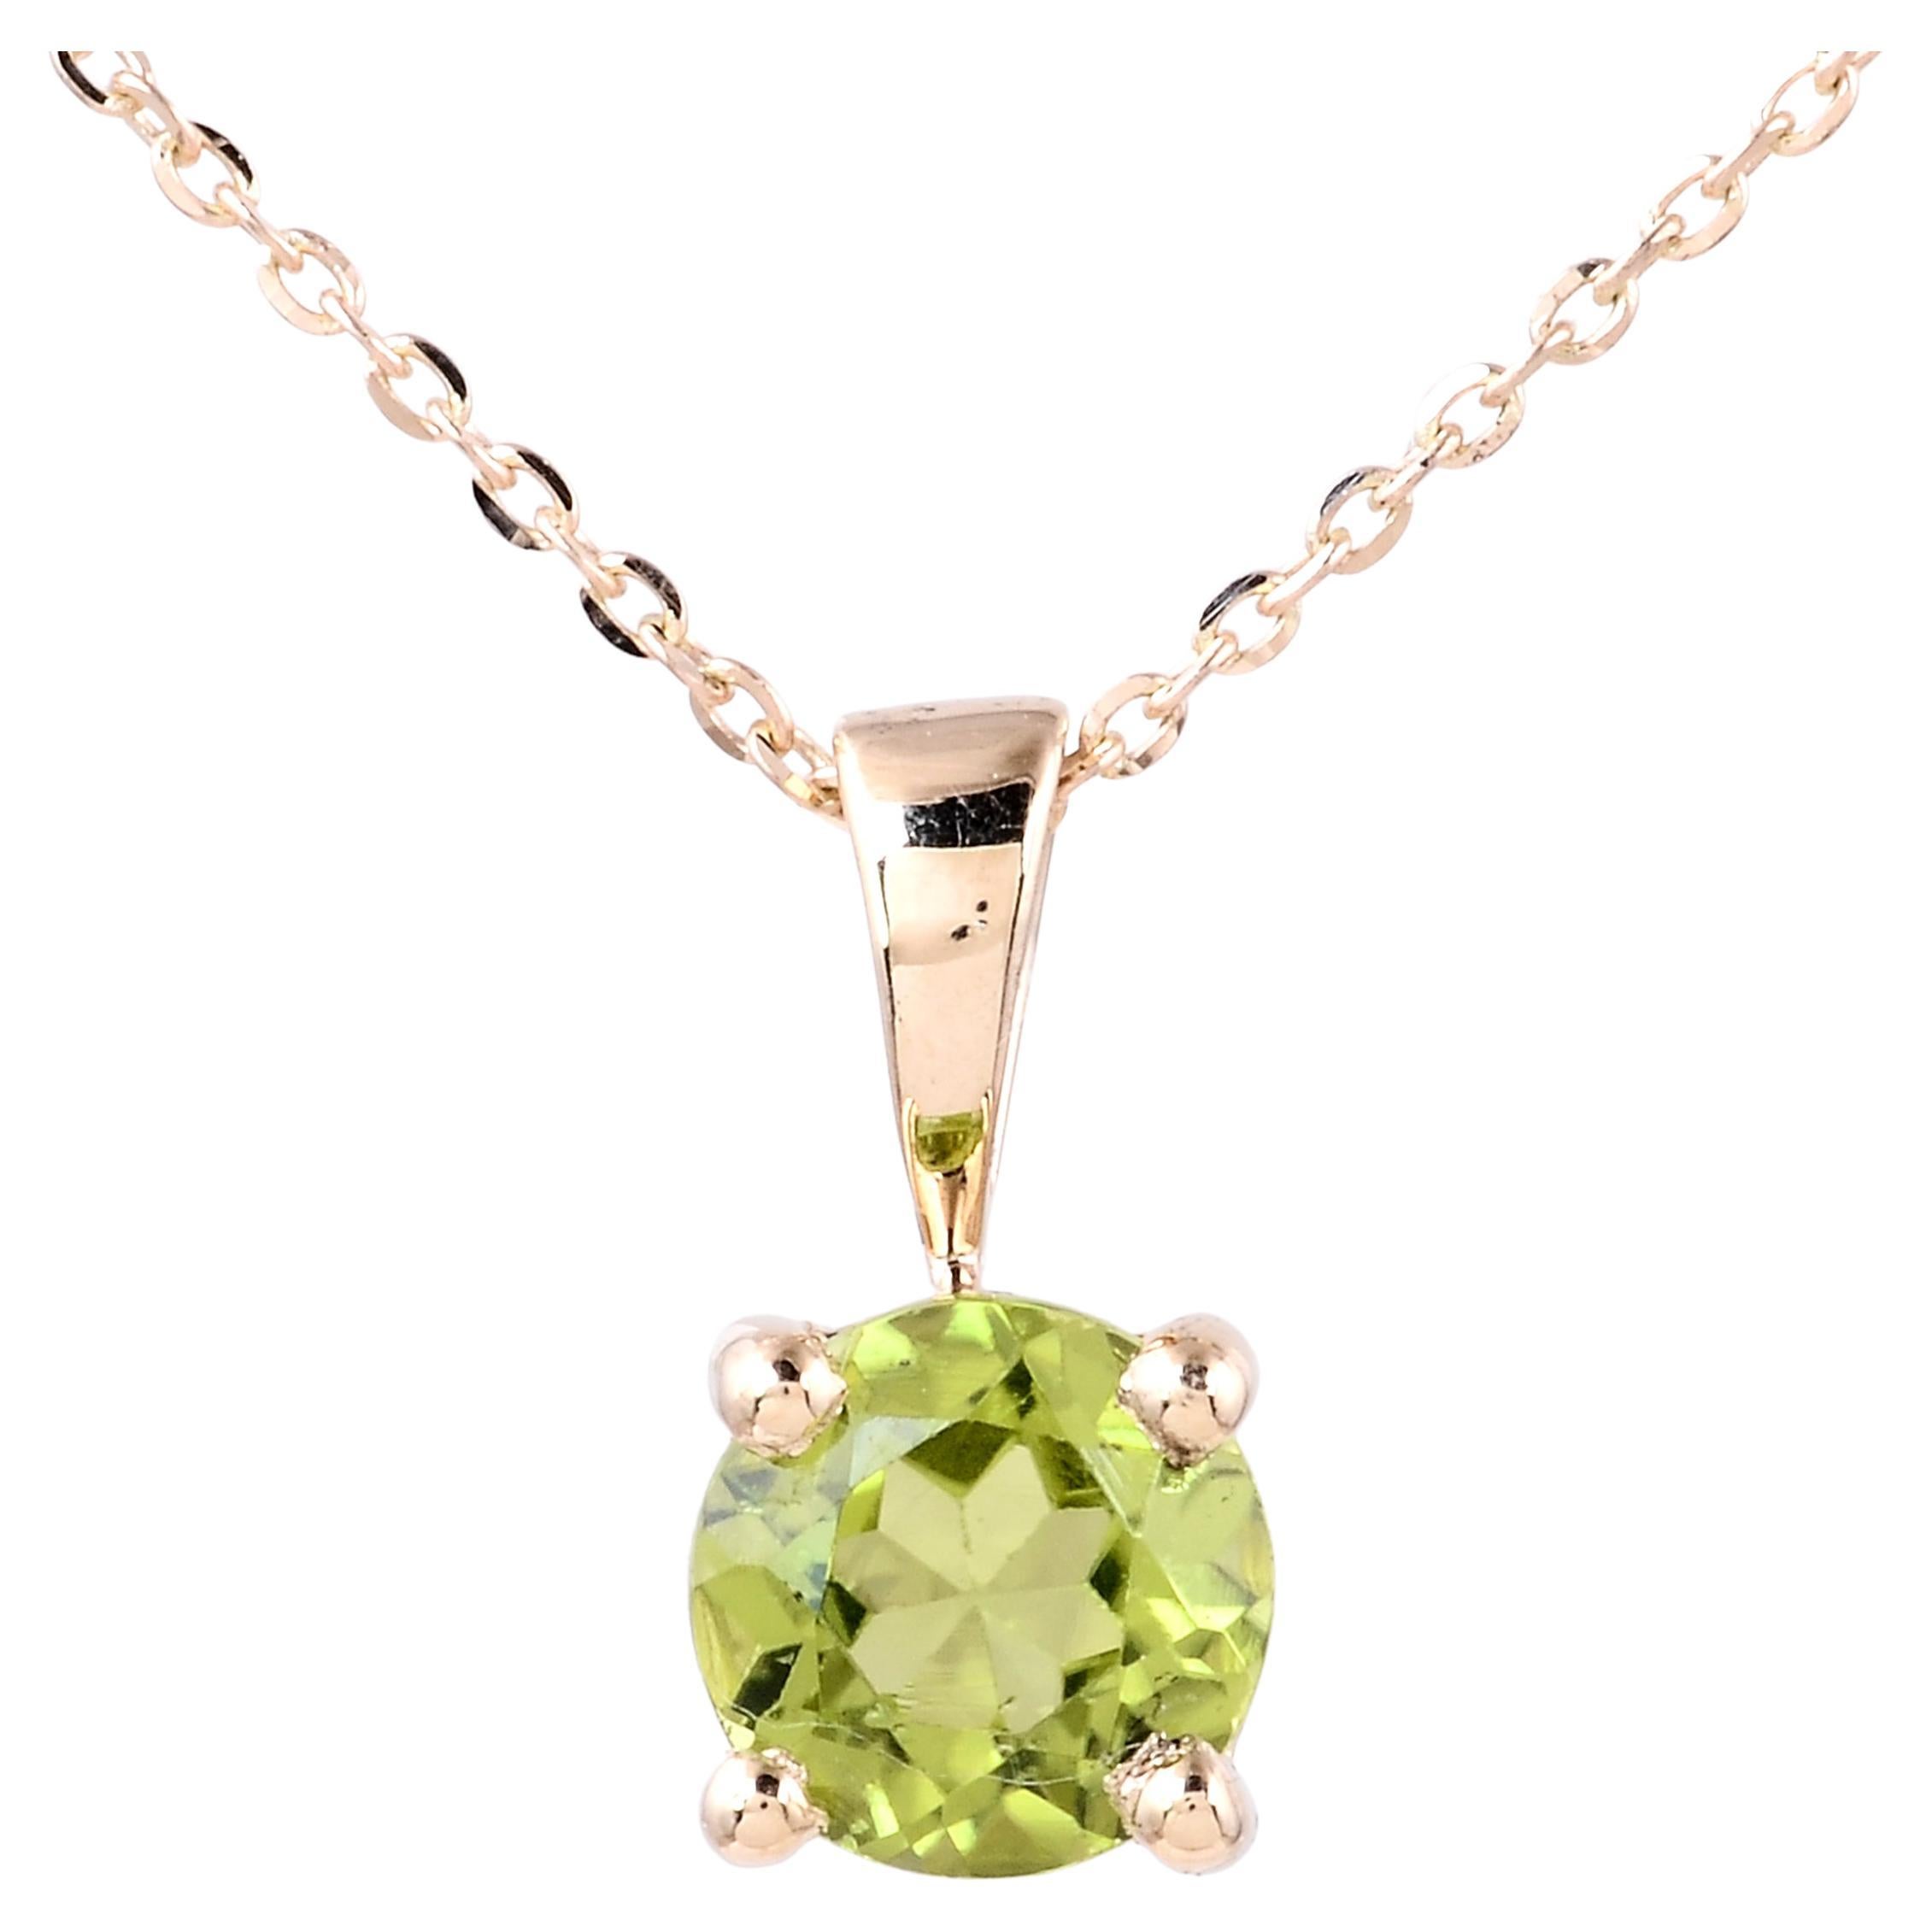 Luxury 14K Peridot Pendant Necklace - Exquisite Jewelry for Timeless Elegance For Sale